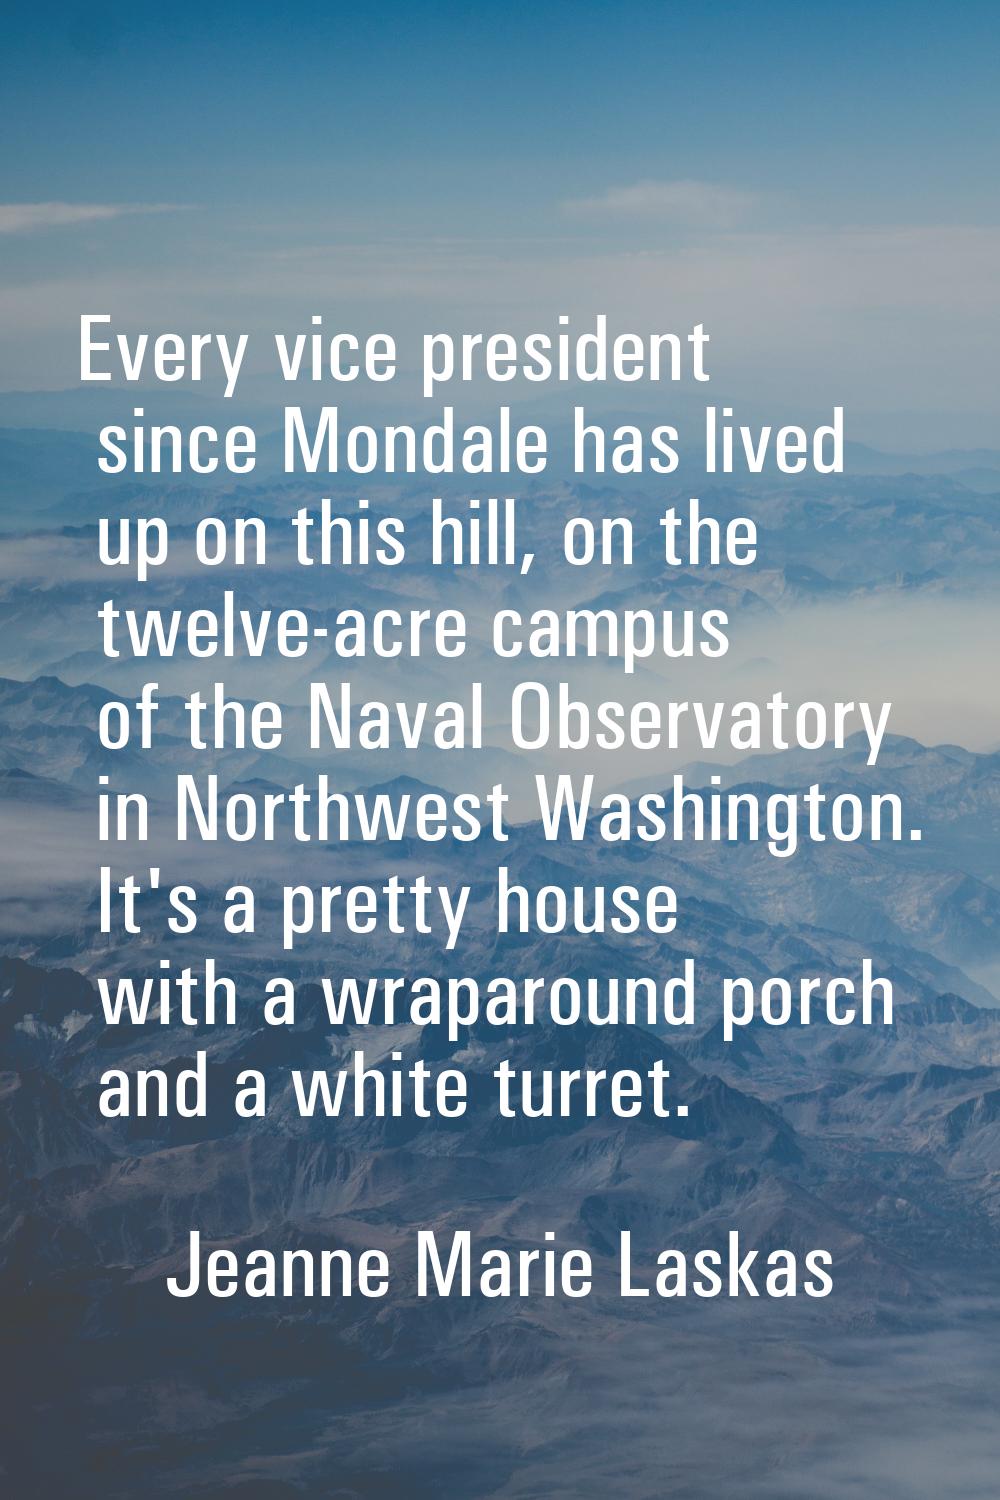 Every vice president since Mondale has lived up on this hill, on the twelve-acre campus of the Nava